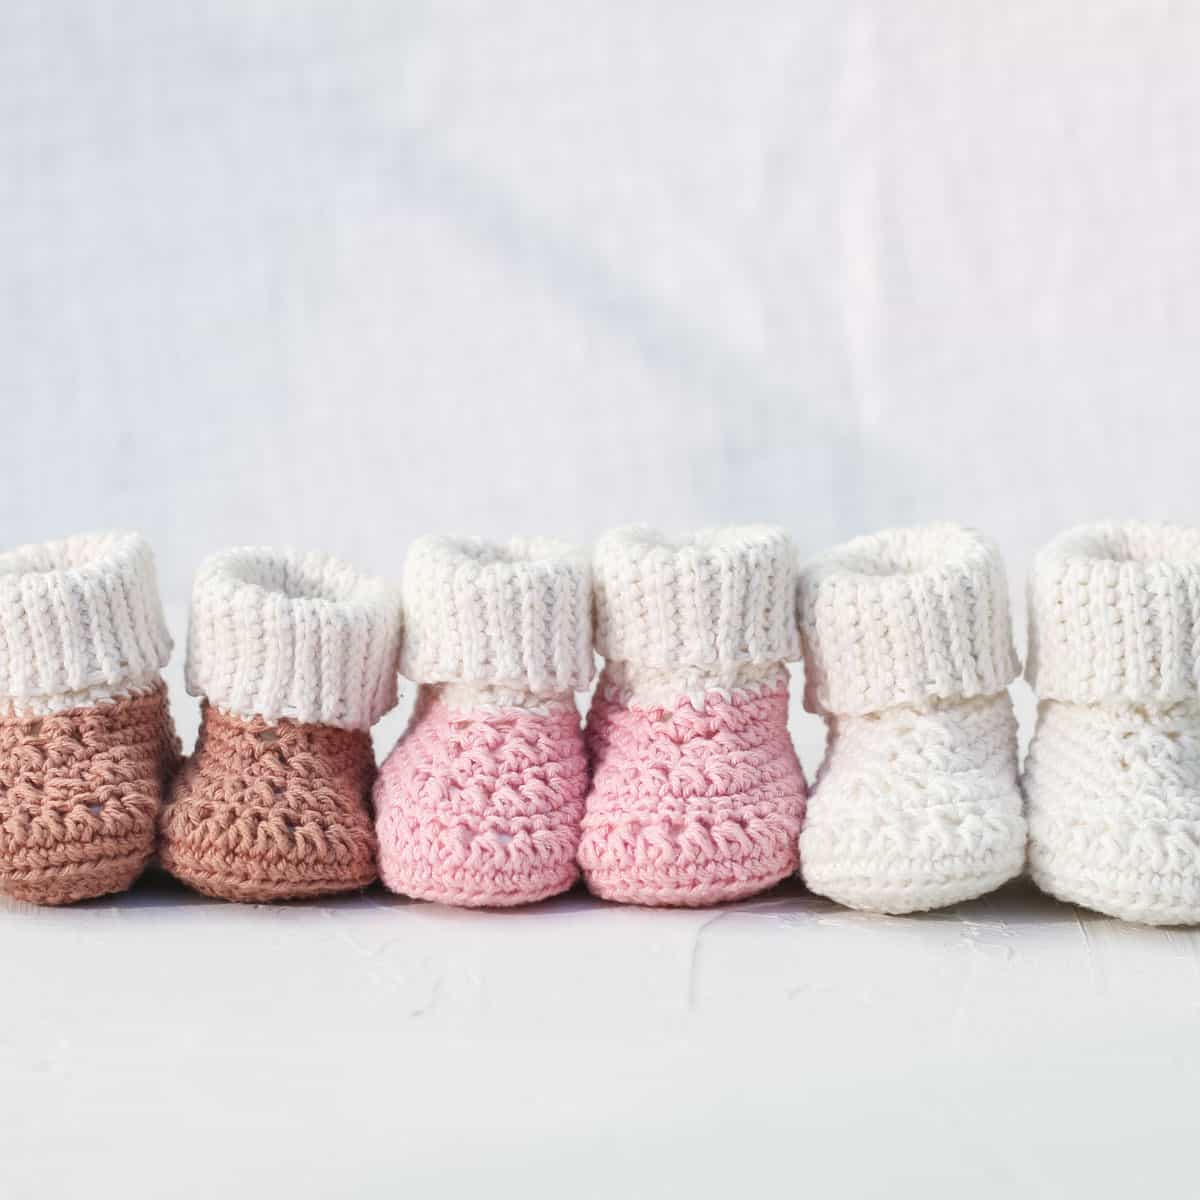 On Your Toes Leg Warmers Crochet Pattern – Baby – Toddler – Young